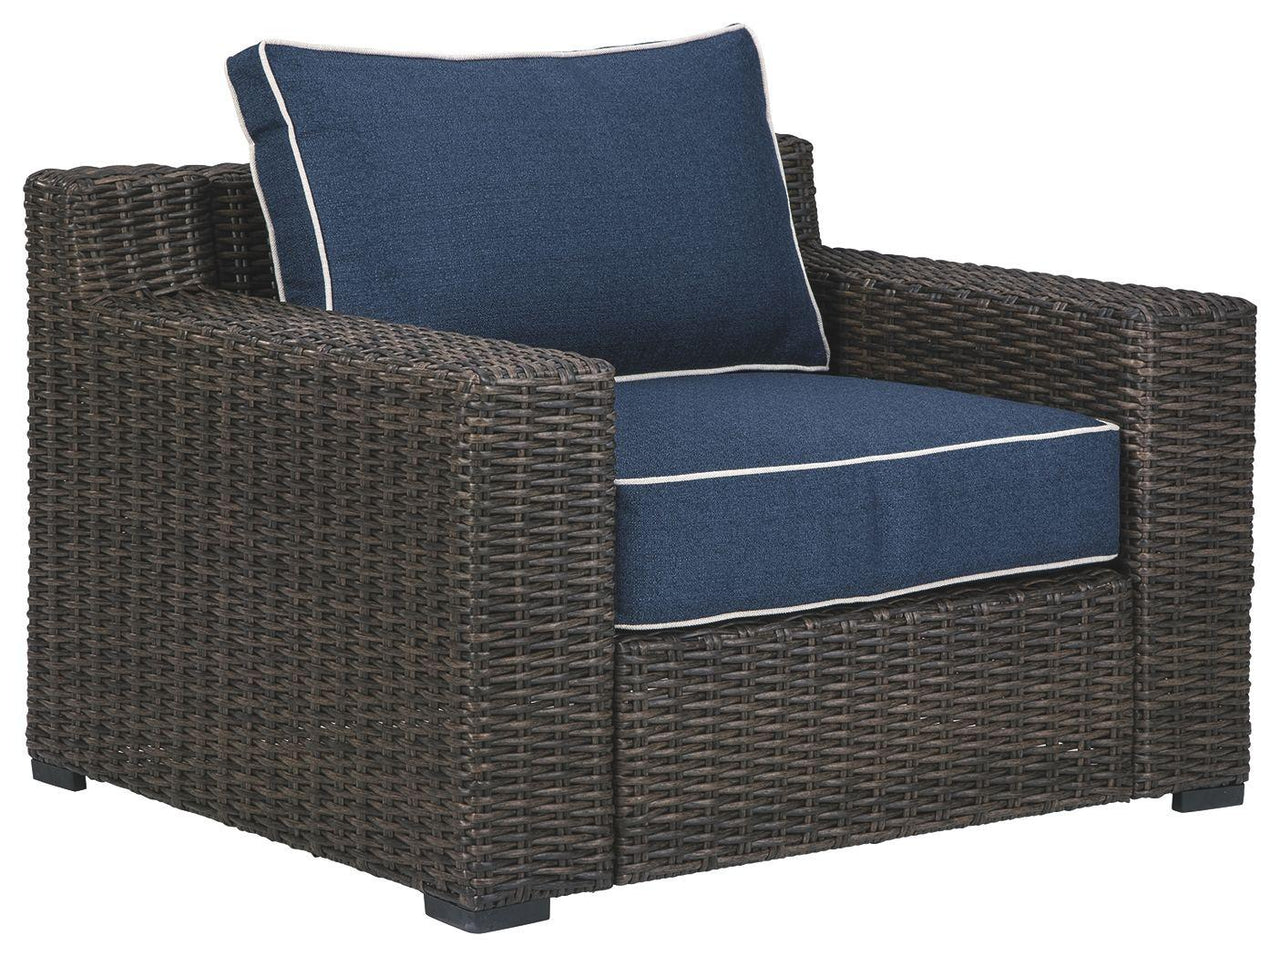 Grasson - Brown / Blue - Lounge Chair W/Cushion Tony's Home Furnishings Furniture. Beds. Dressers. Sofas.